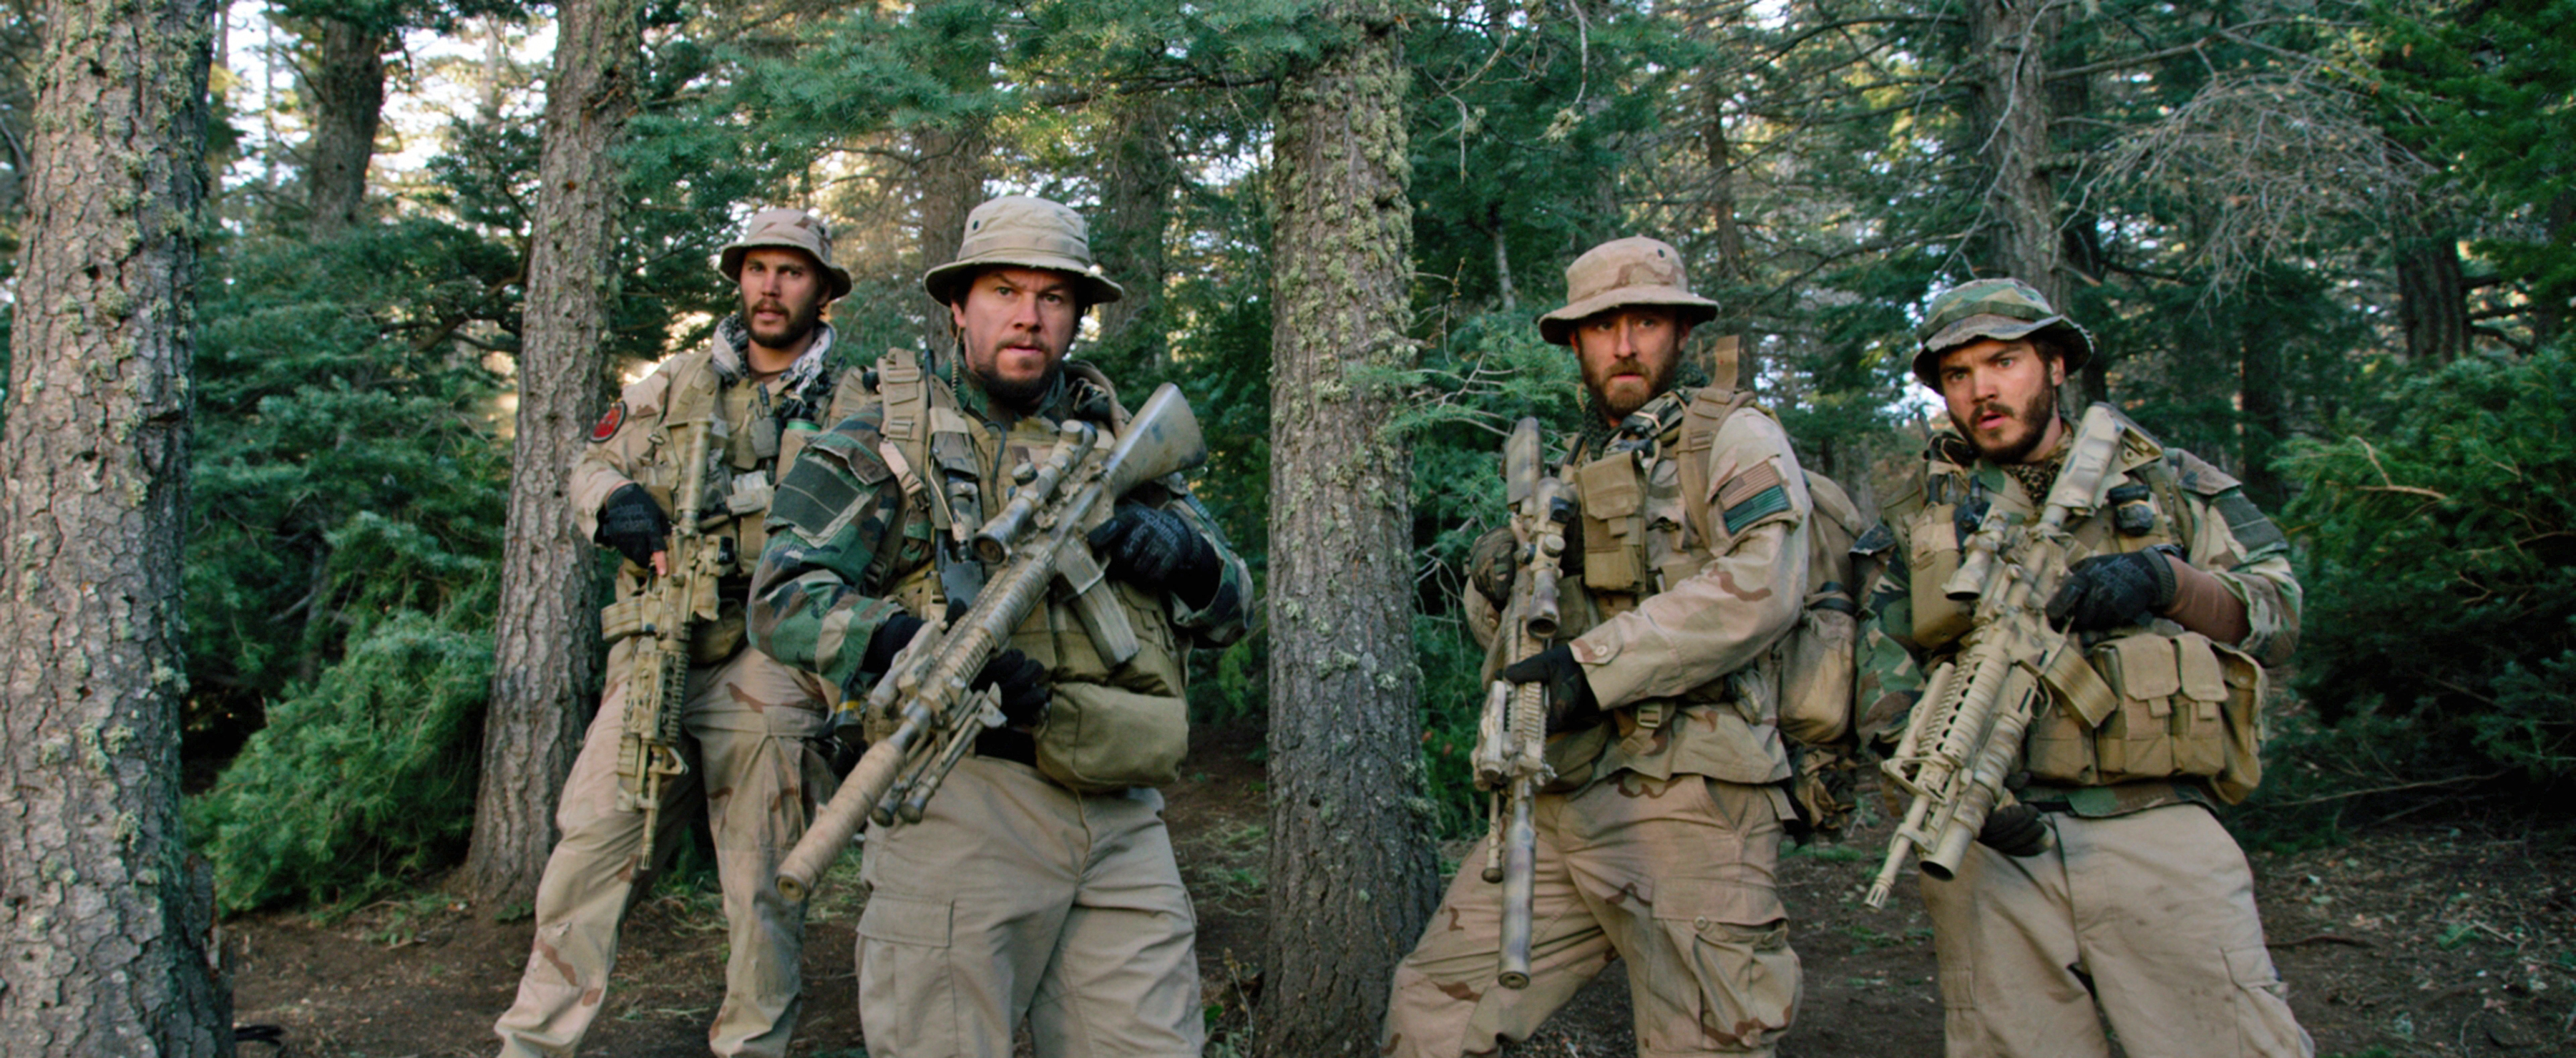 From left, the ill-fated SEALS played by Kitsch, Wahlberg, Foster, and Hirsch.Universal Pictures